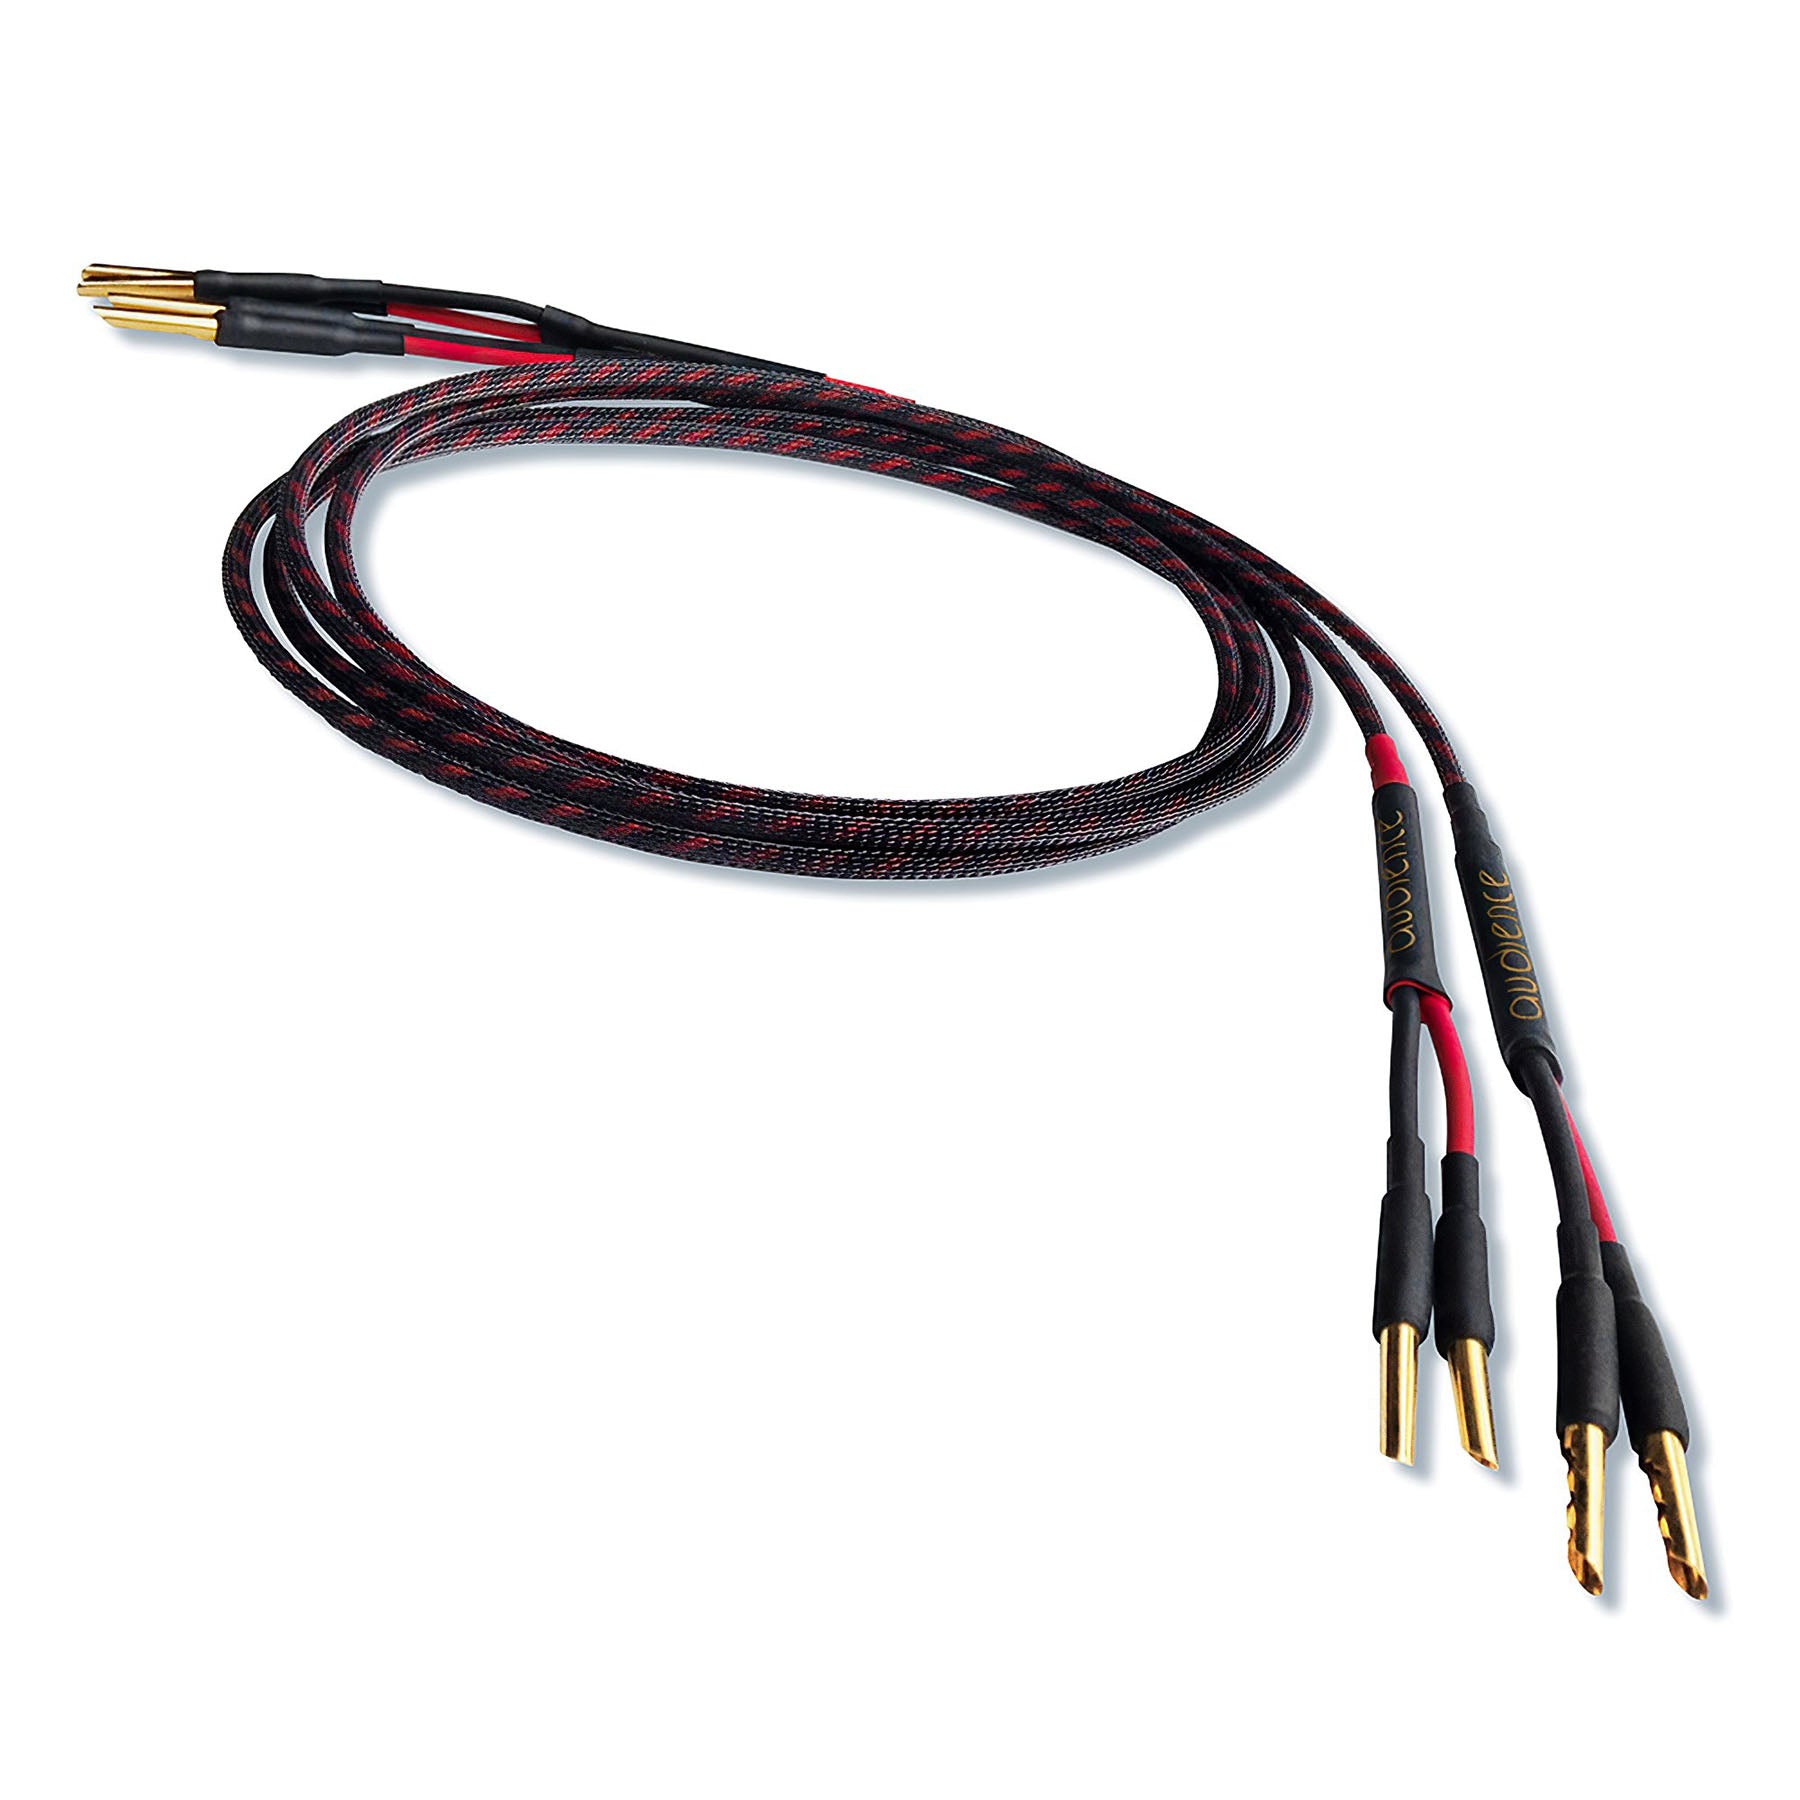 Audience OHNO III Precision Speaker Cables (pair)